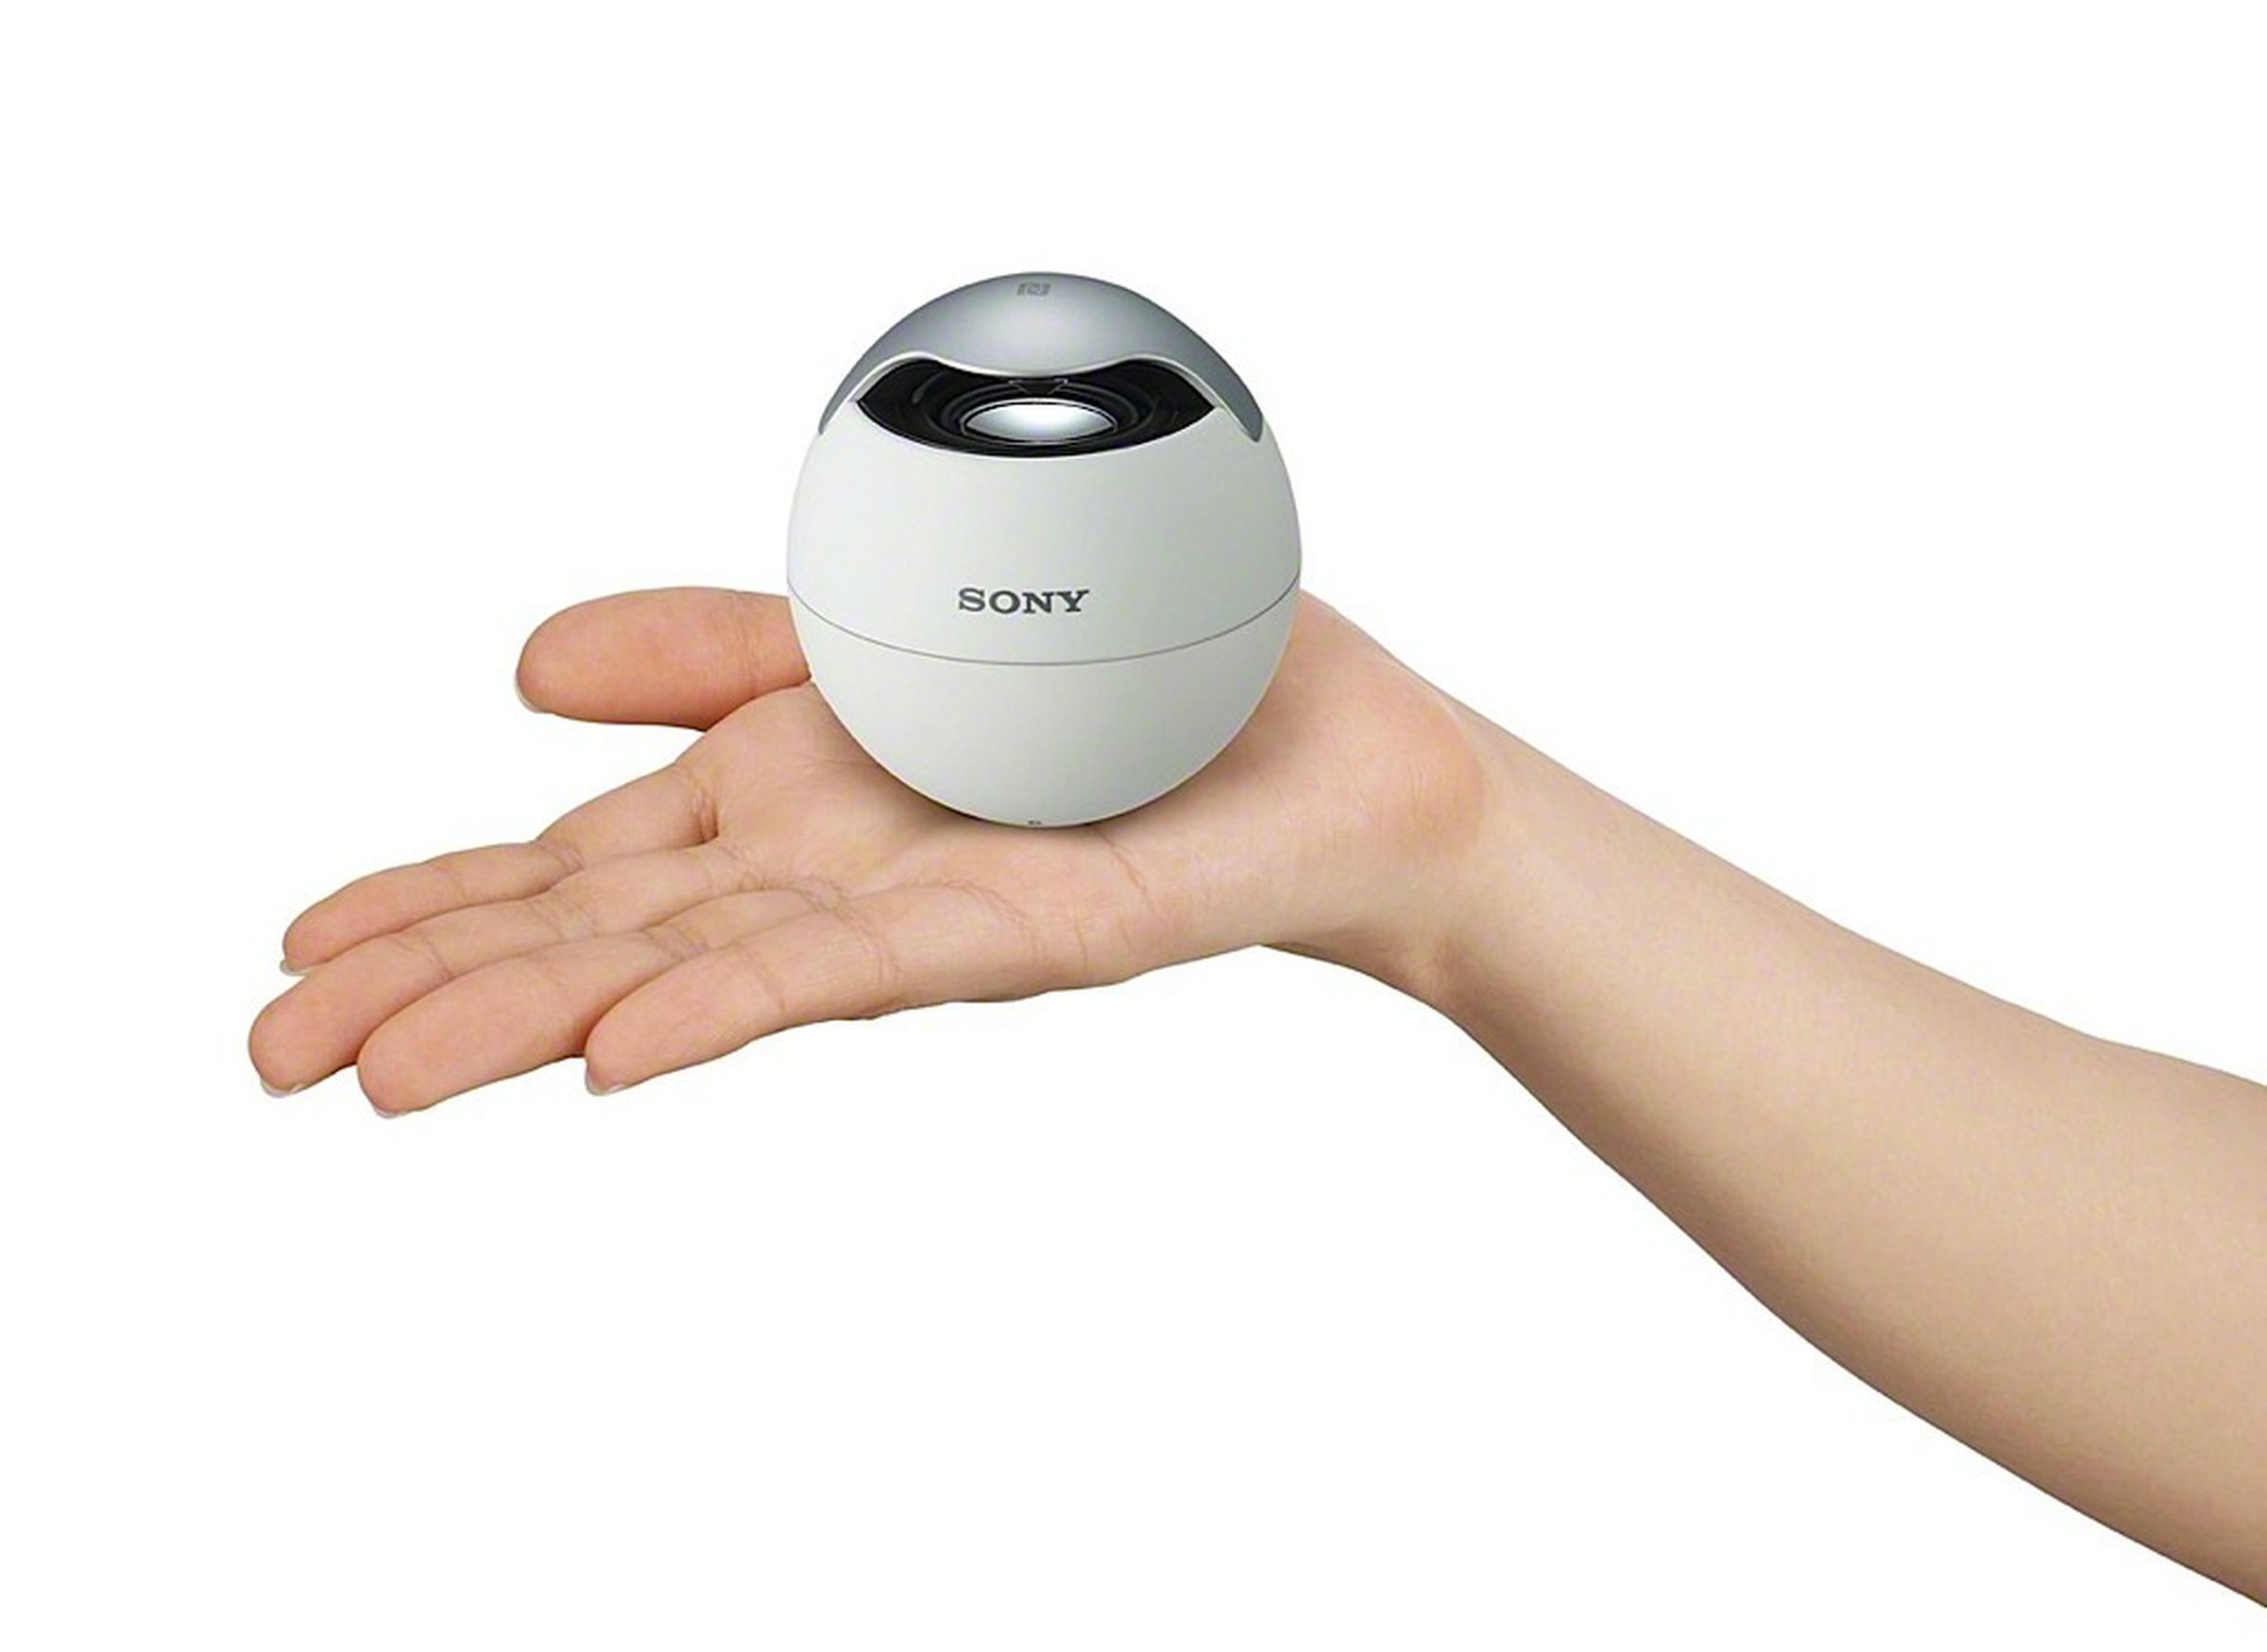 Sony Bluetooth and NFC wireless speakers